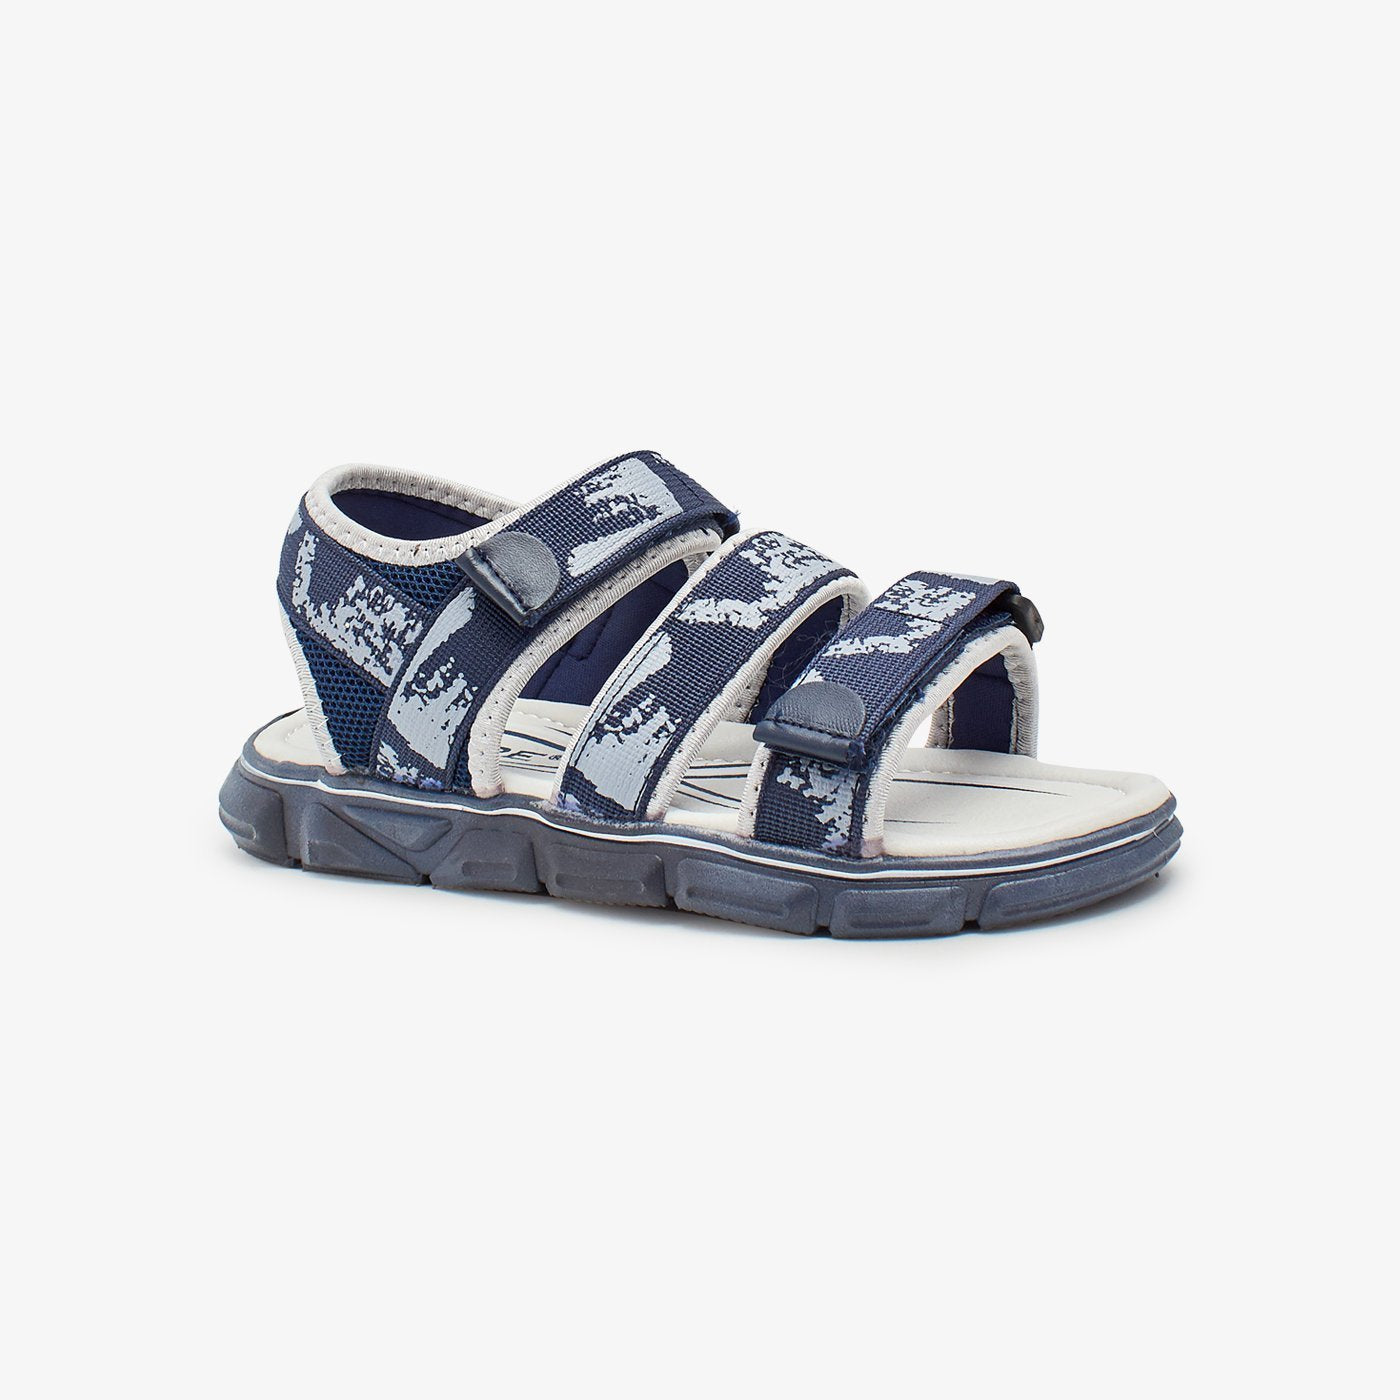 Strapped Boys Sandals